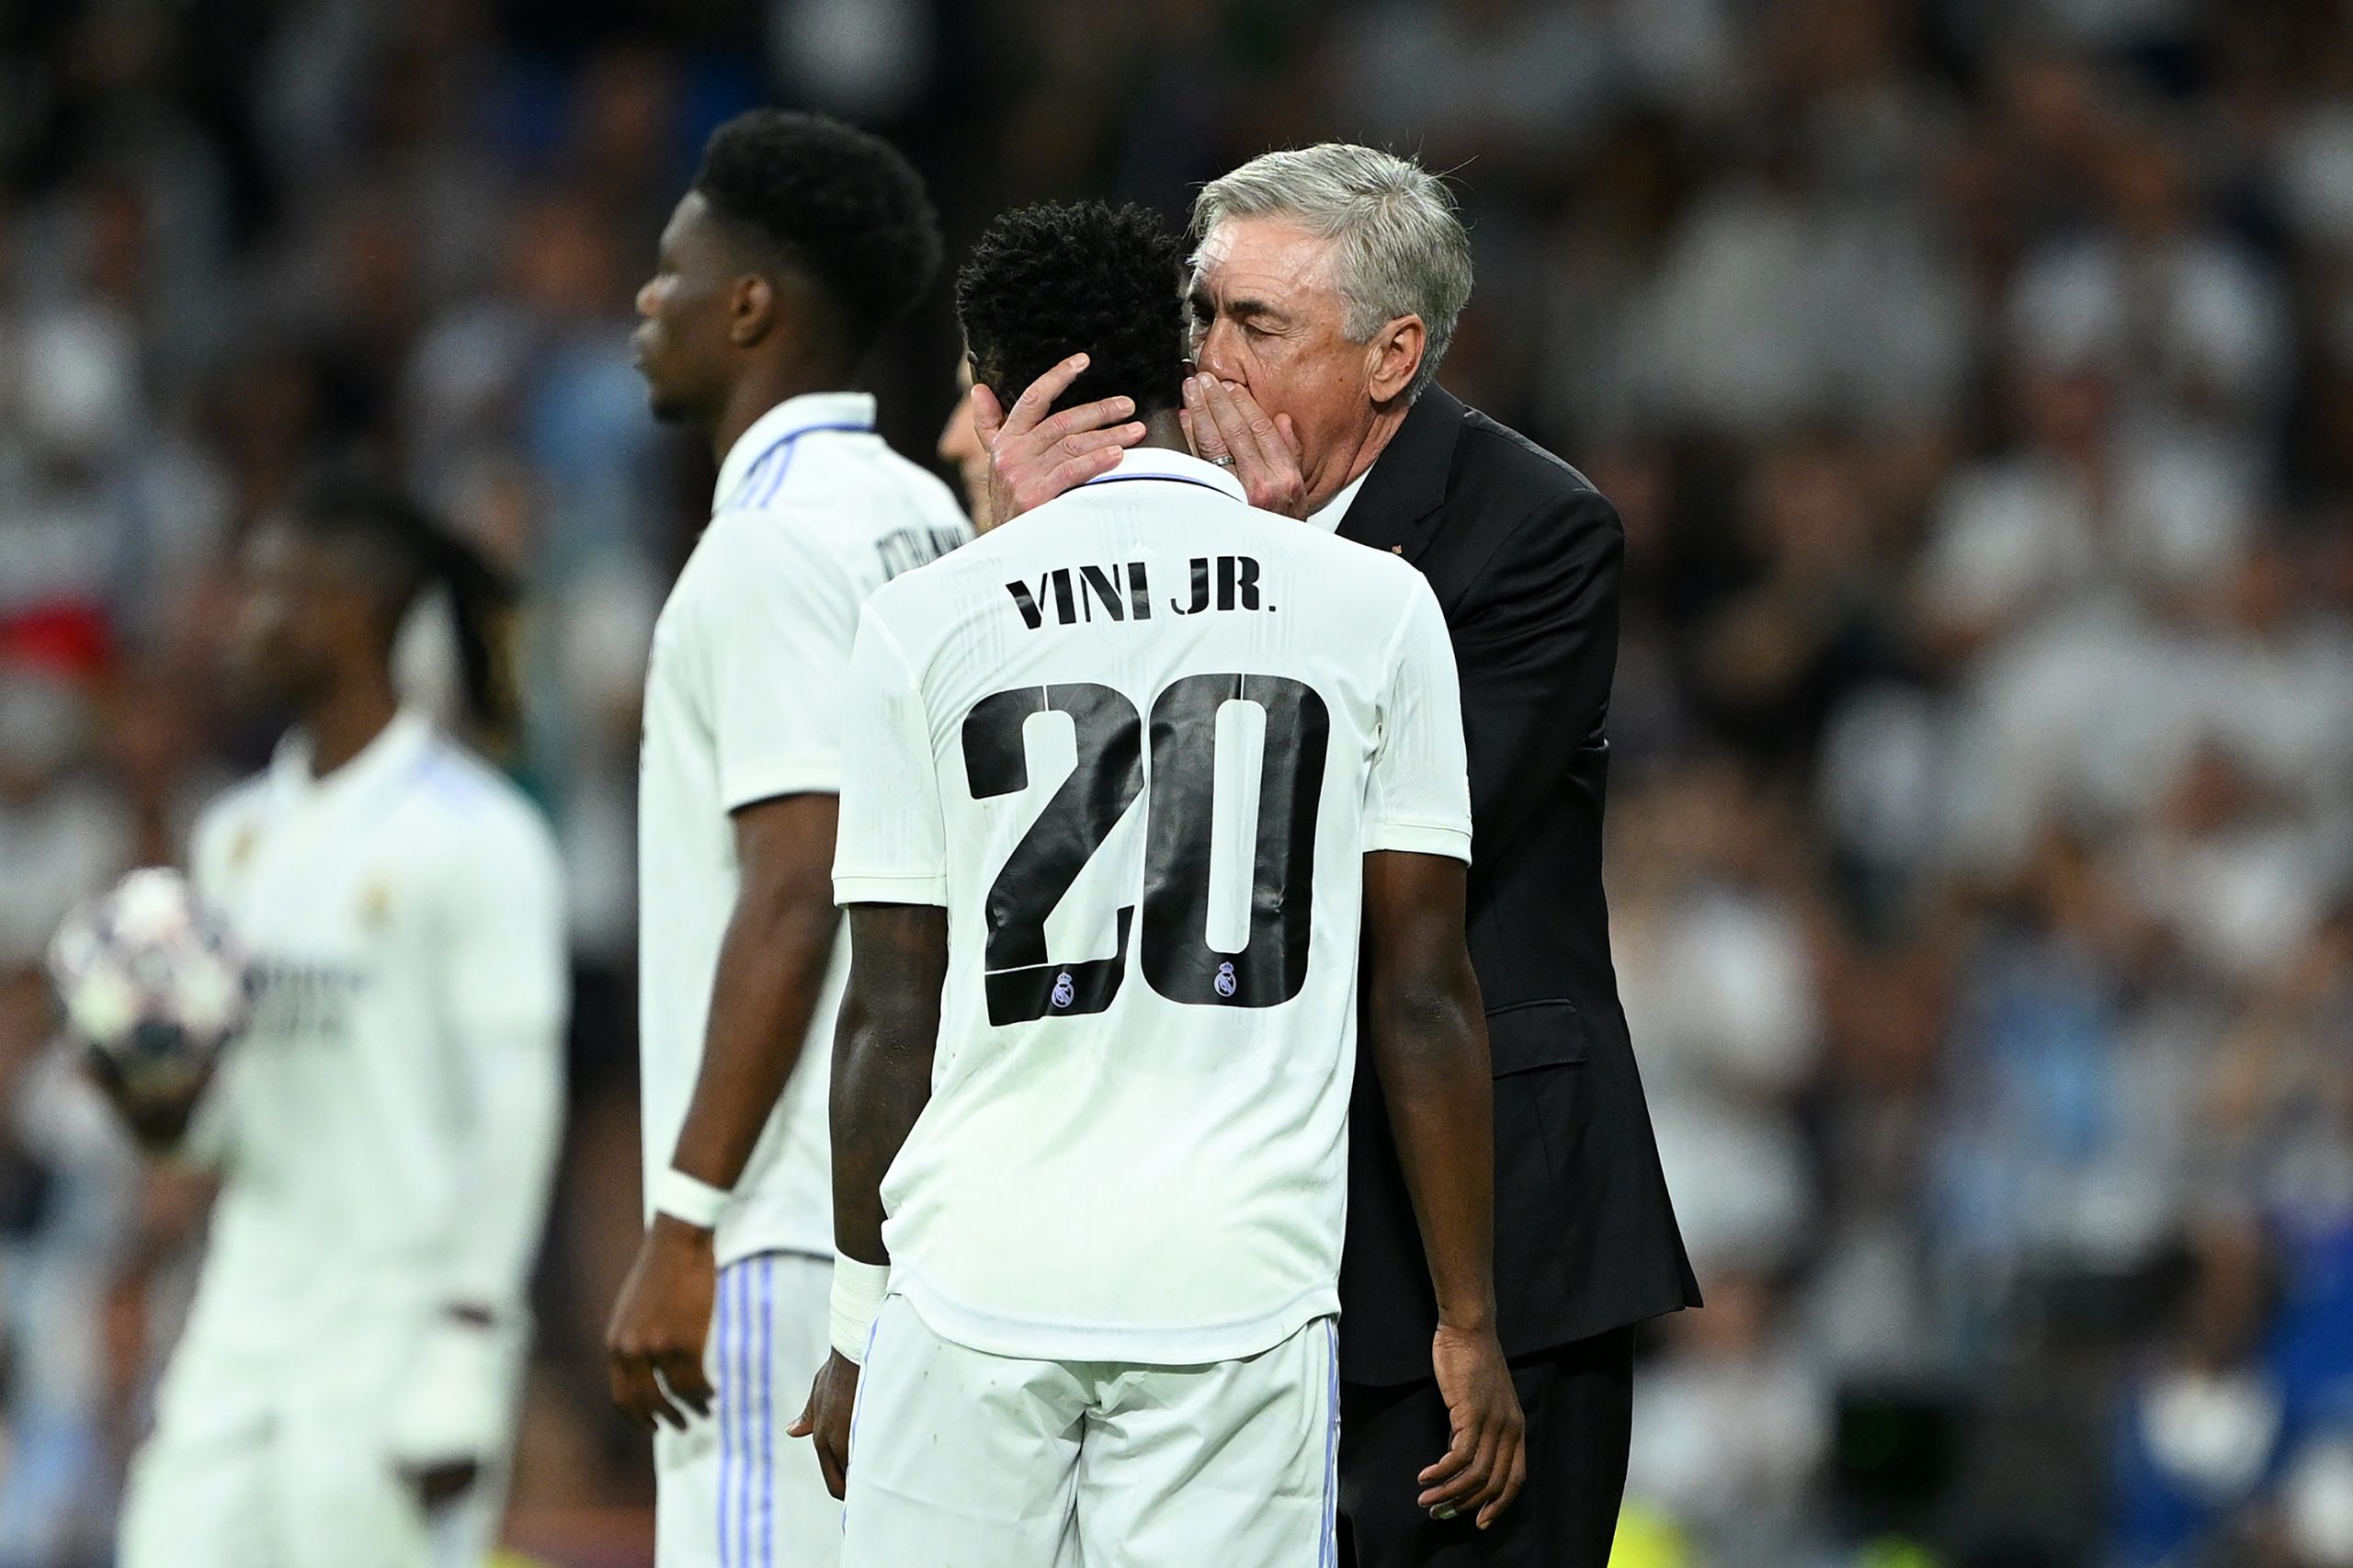 MADRID, SPAIN - MAY 09: Carlo Ancelotti embraces Vinicius Junior of Real Madrid during the UEFA Champions League semi-final first leg match between Real Madrid and Manchester City FC at Estadio Santiago Bernabeu on May 09, 2023 in Madrid, Spain. (Photo by David Ramos/Getty Images)